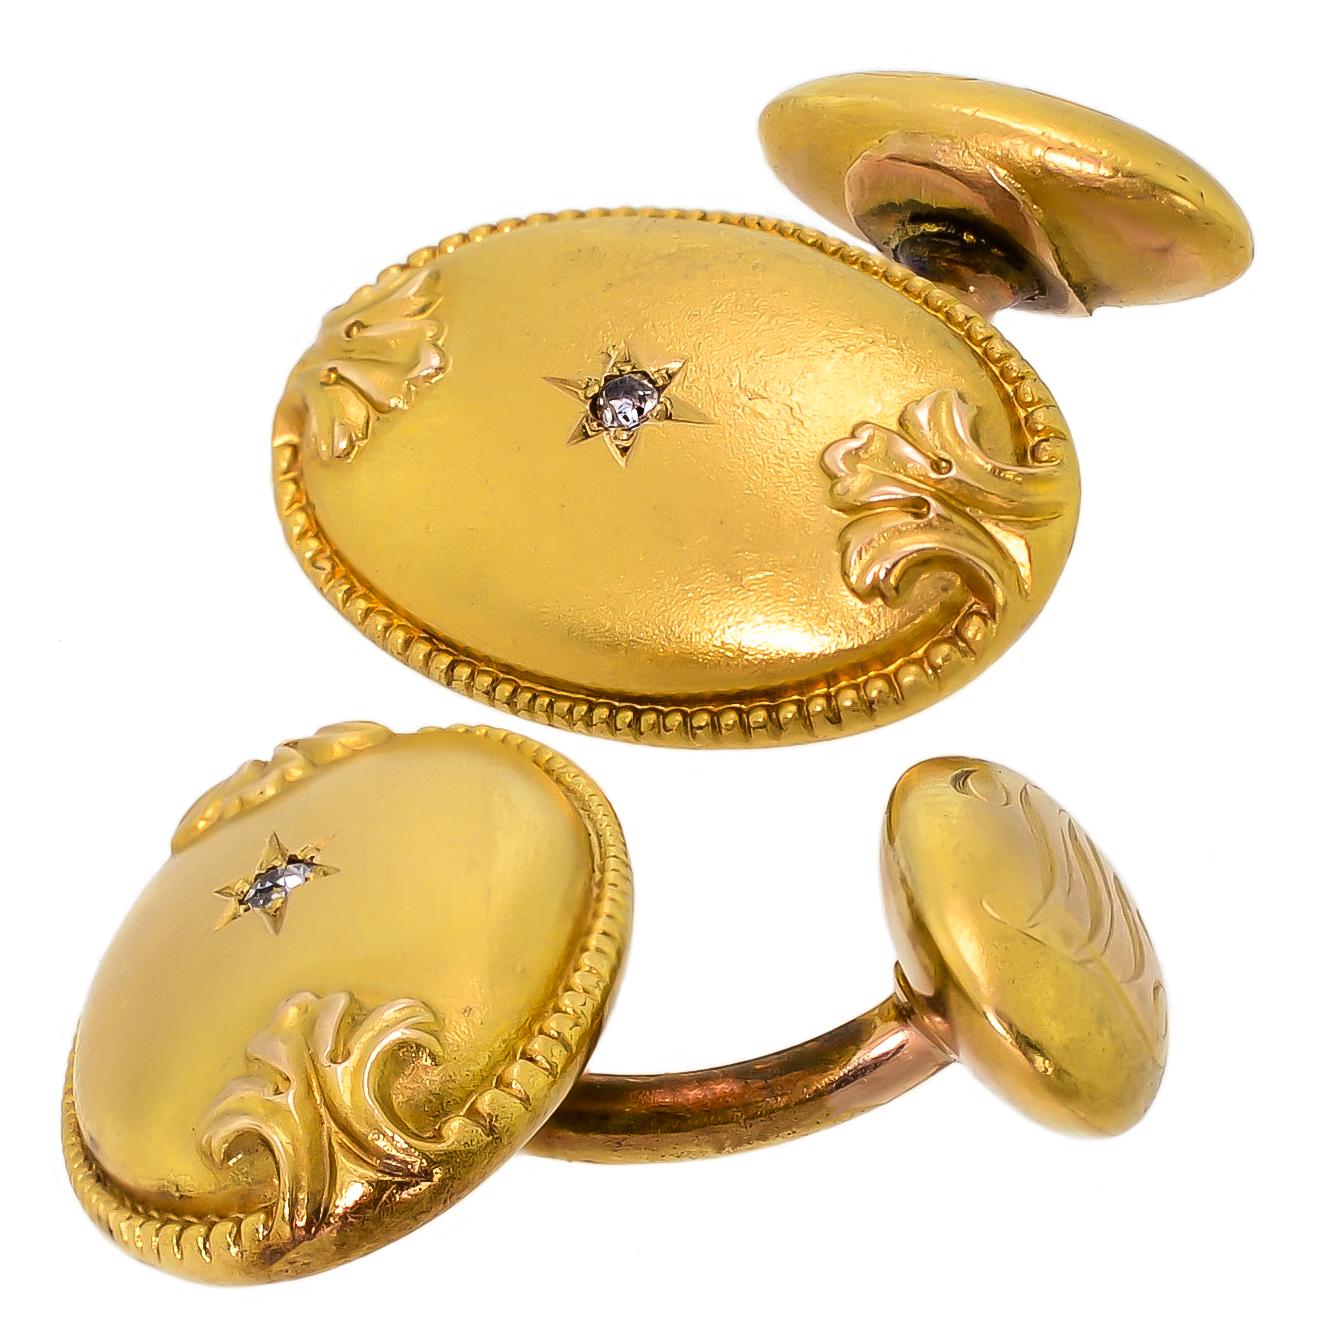 These exquisite oval Victorian 18k yellow gold and diamond cufflinks are handsome and tailored and exhibit elegance, style, and confidence with their simple design. The oval textured front is decorated with a rippled border that leads into an